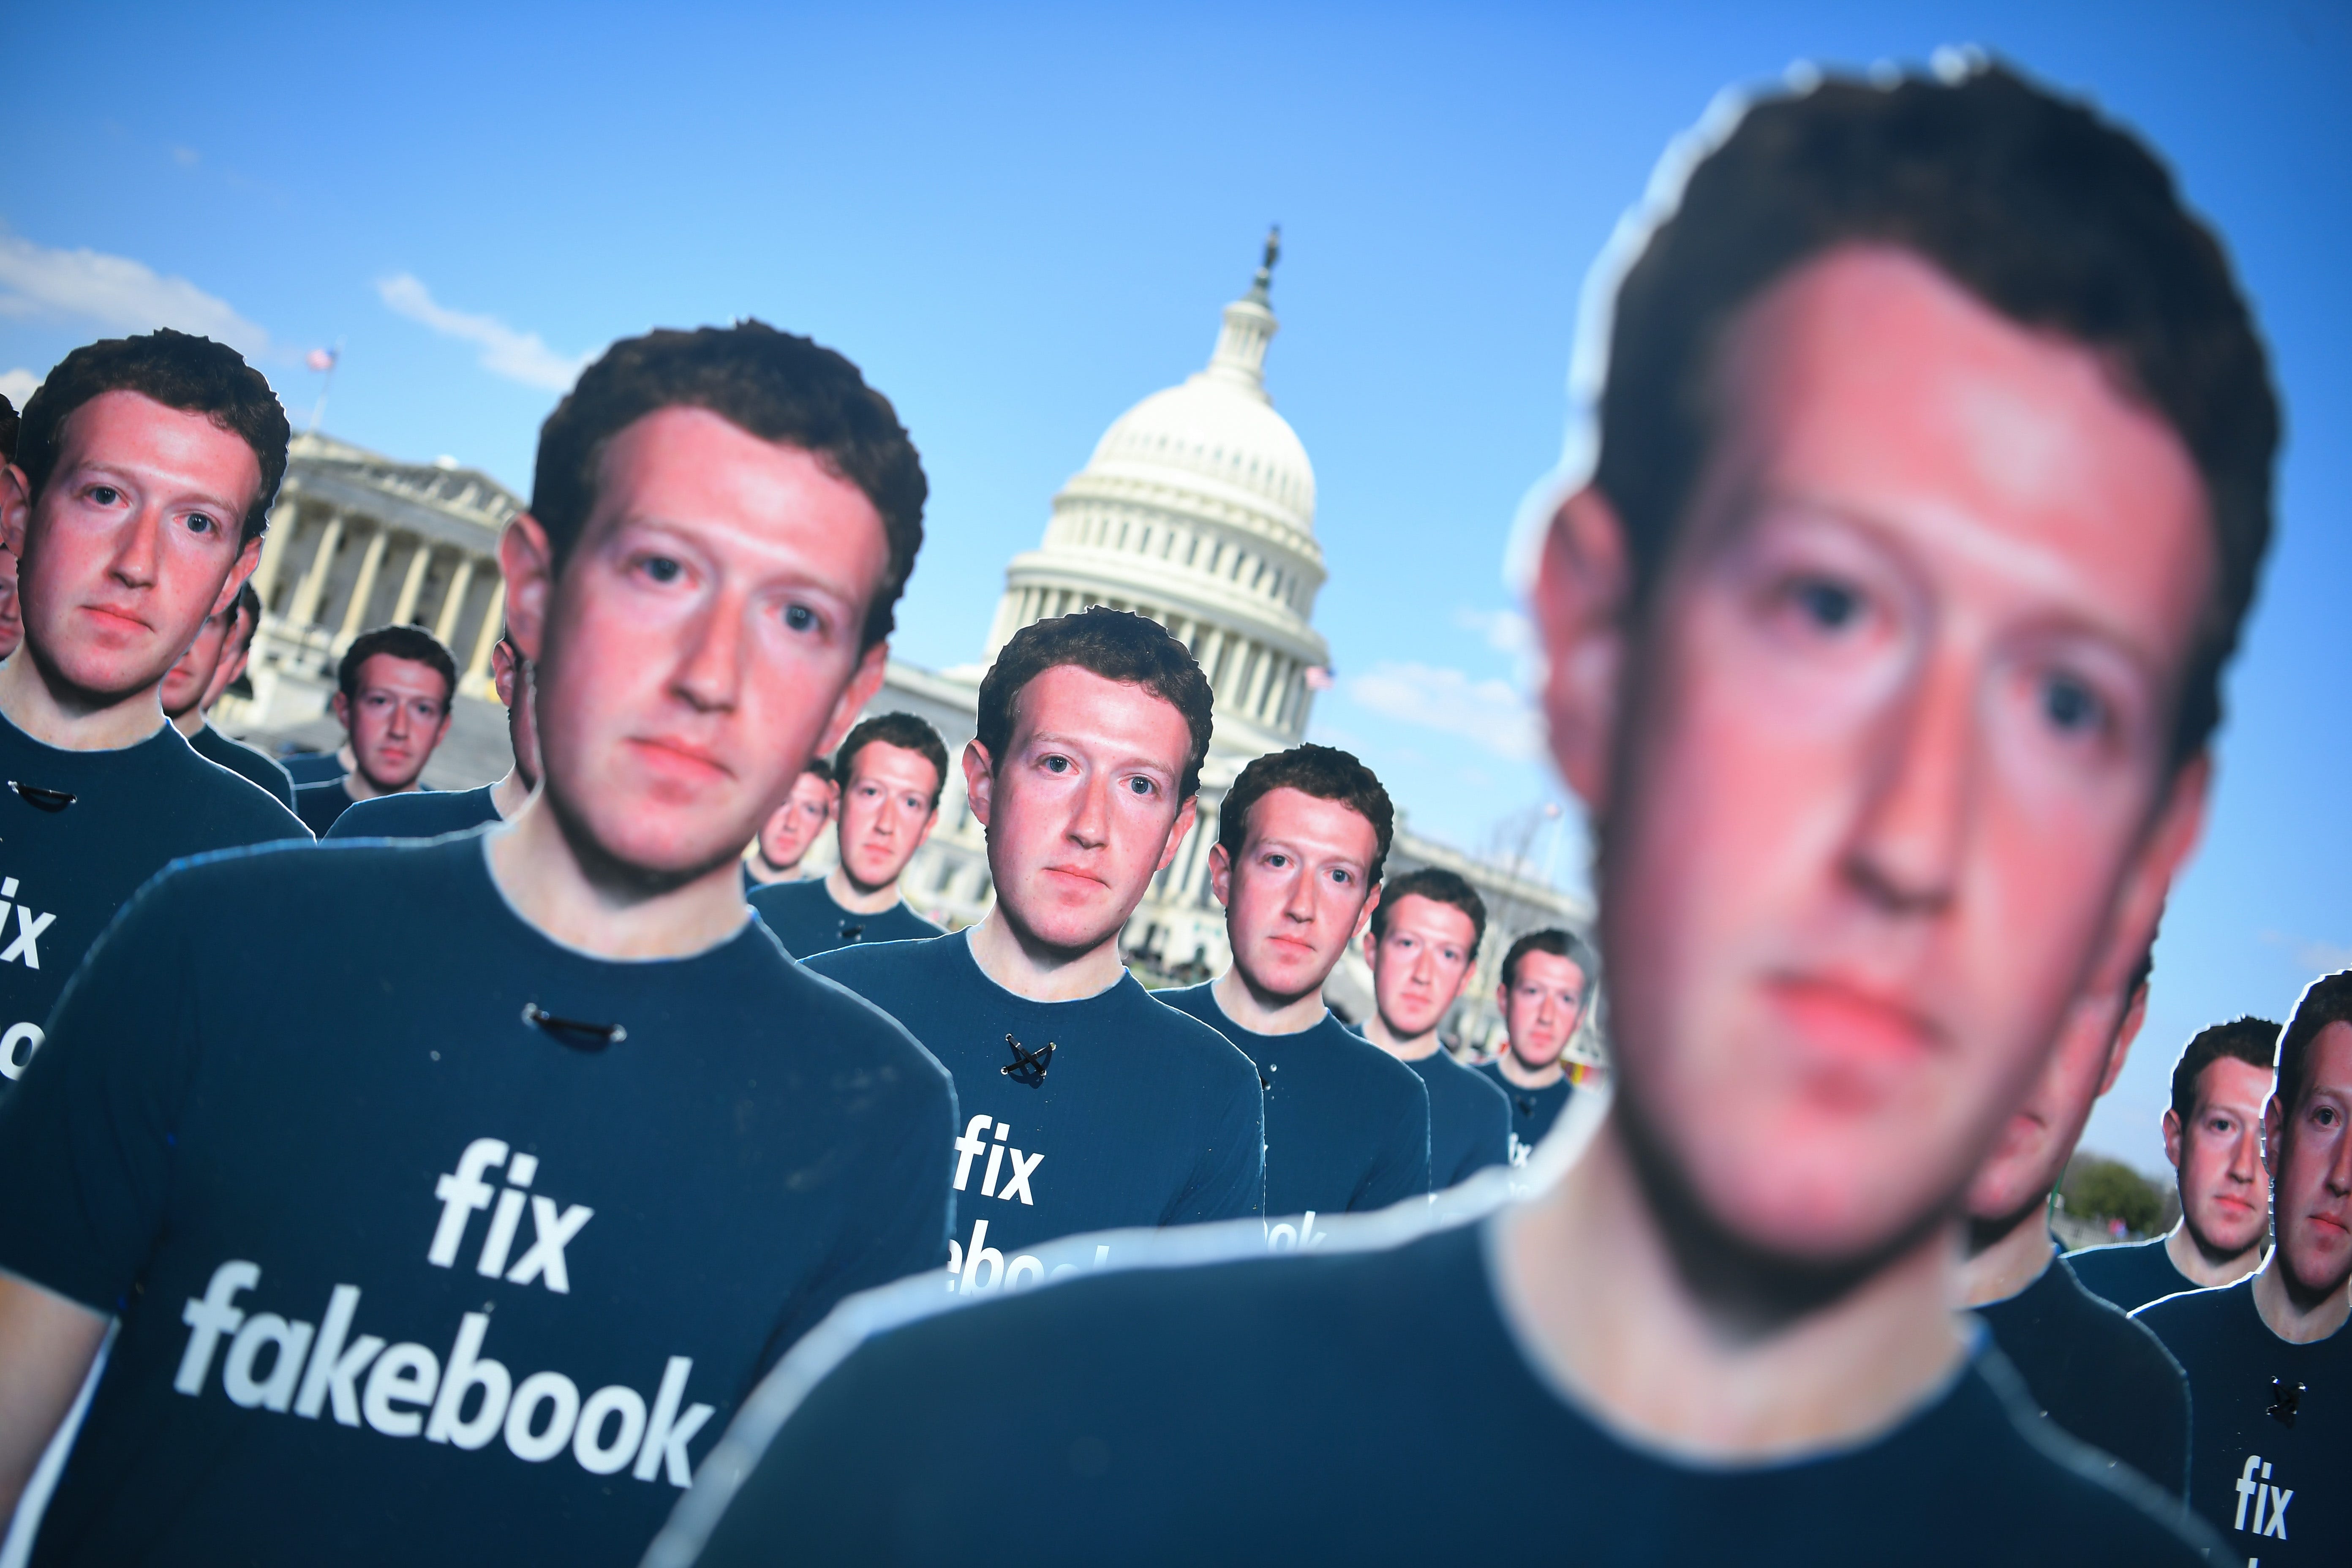 Life-sized cutouts of Facebook CEO Mark Zuckerberg are placed by the advocacy group Avaaz on the lawn of the United States Capitol in Washington on April 10, 2018, ahead of ZuckerbergÃ•s appearance before a joint hearing of the Senate Judiciary Commi